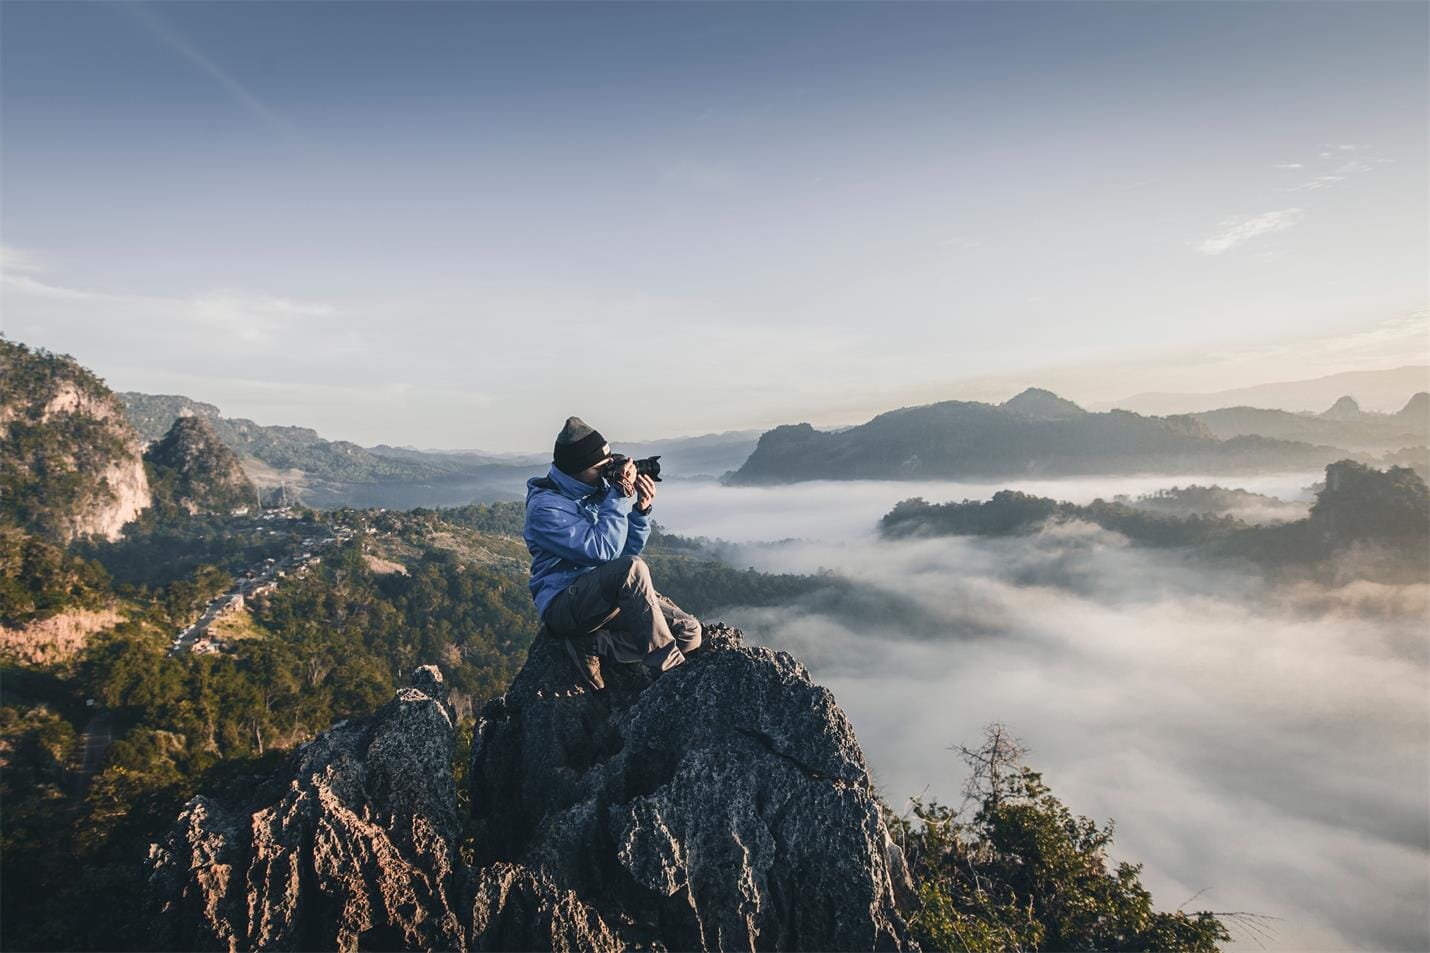 10 Incredible Travel Destinations Every Landscape Photographer Needs to Visit